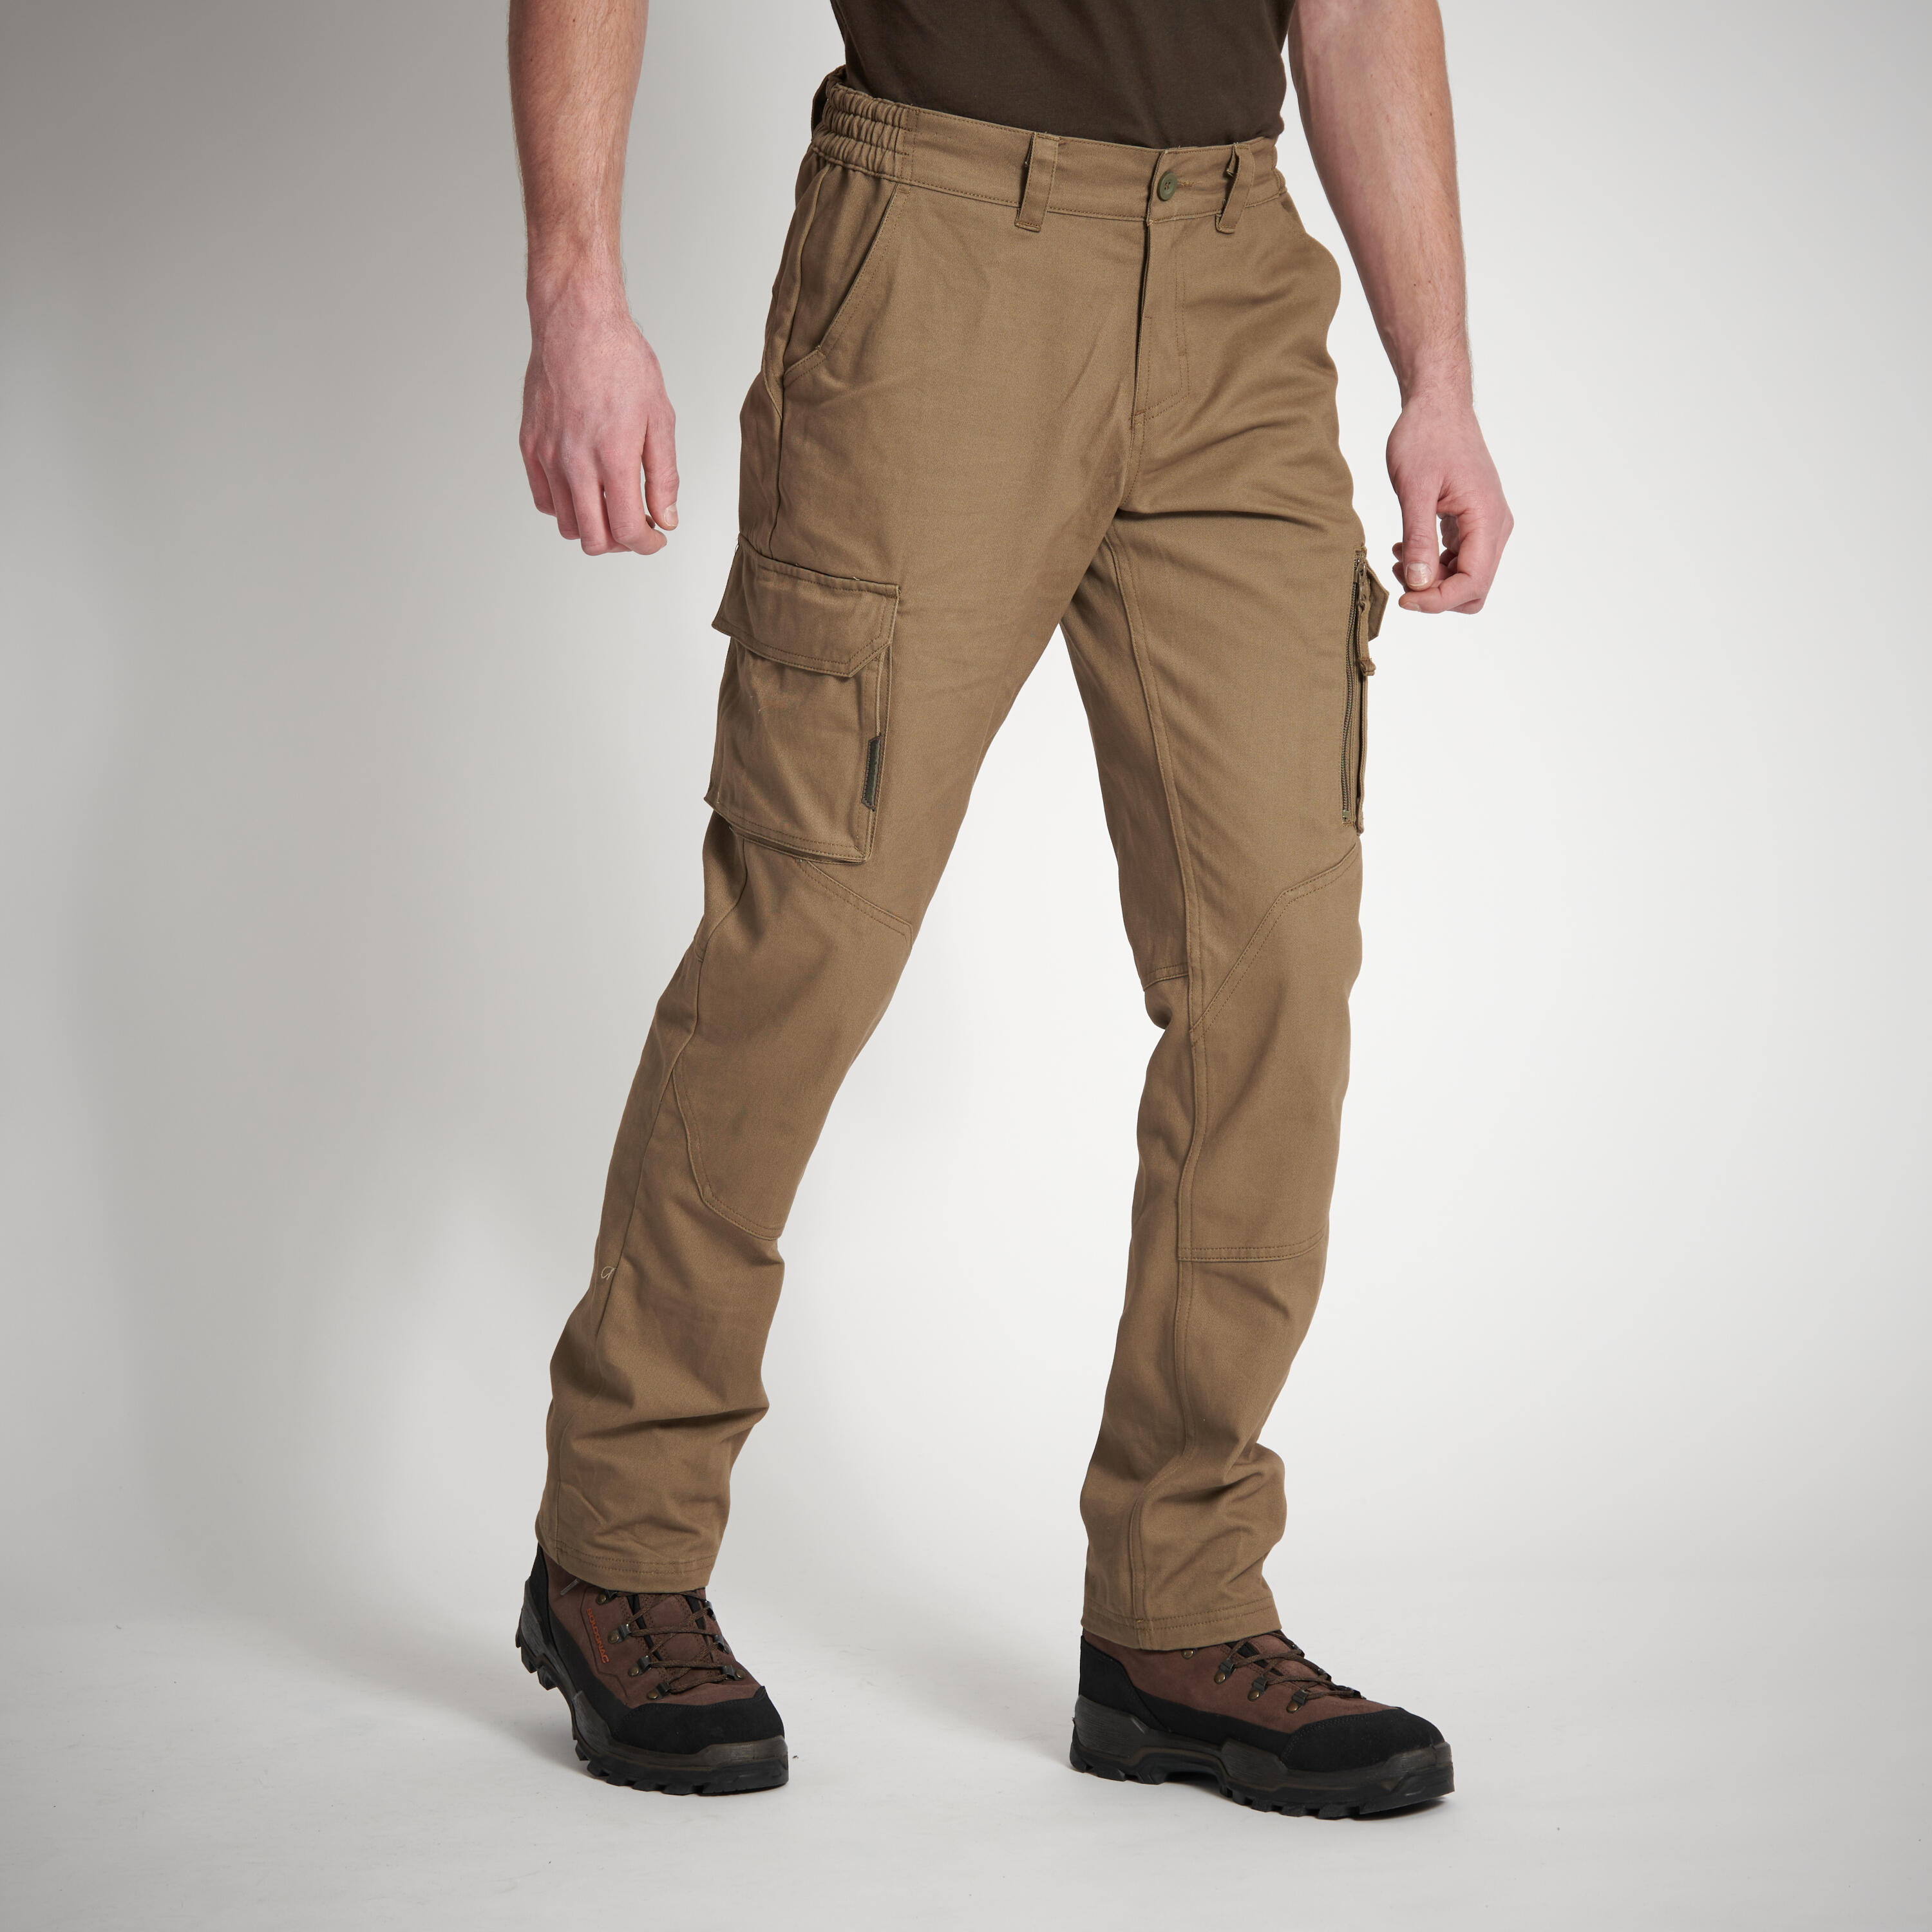 ROBUST CARGO TROUSERS STEPPE 300 CAMOUFLAGE WOODLAND GREEN - Decathlon